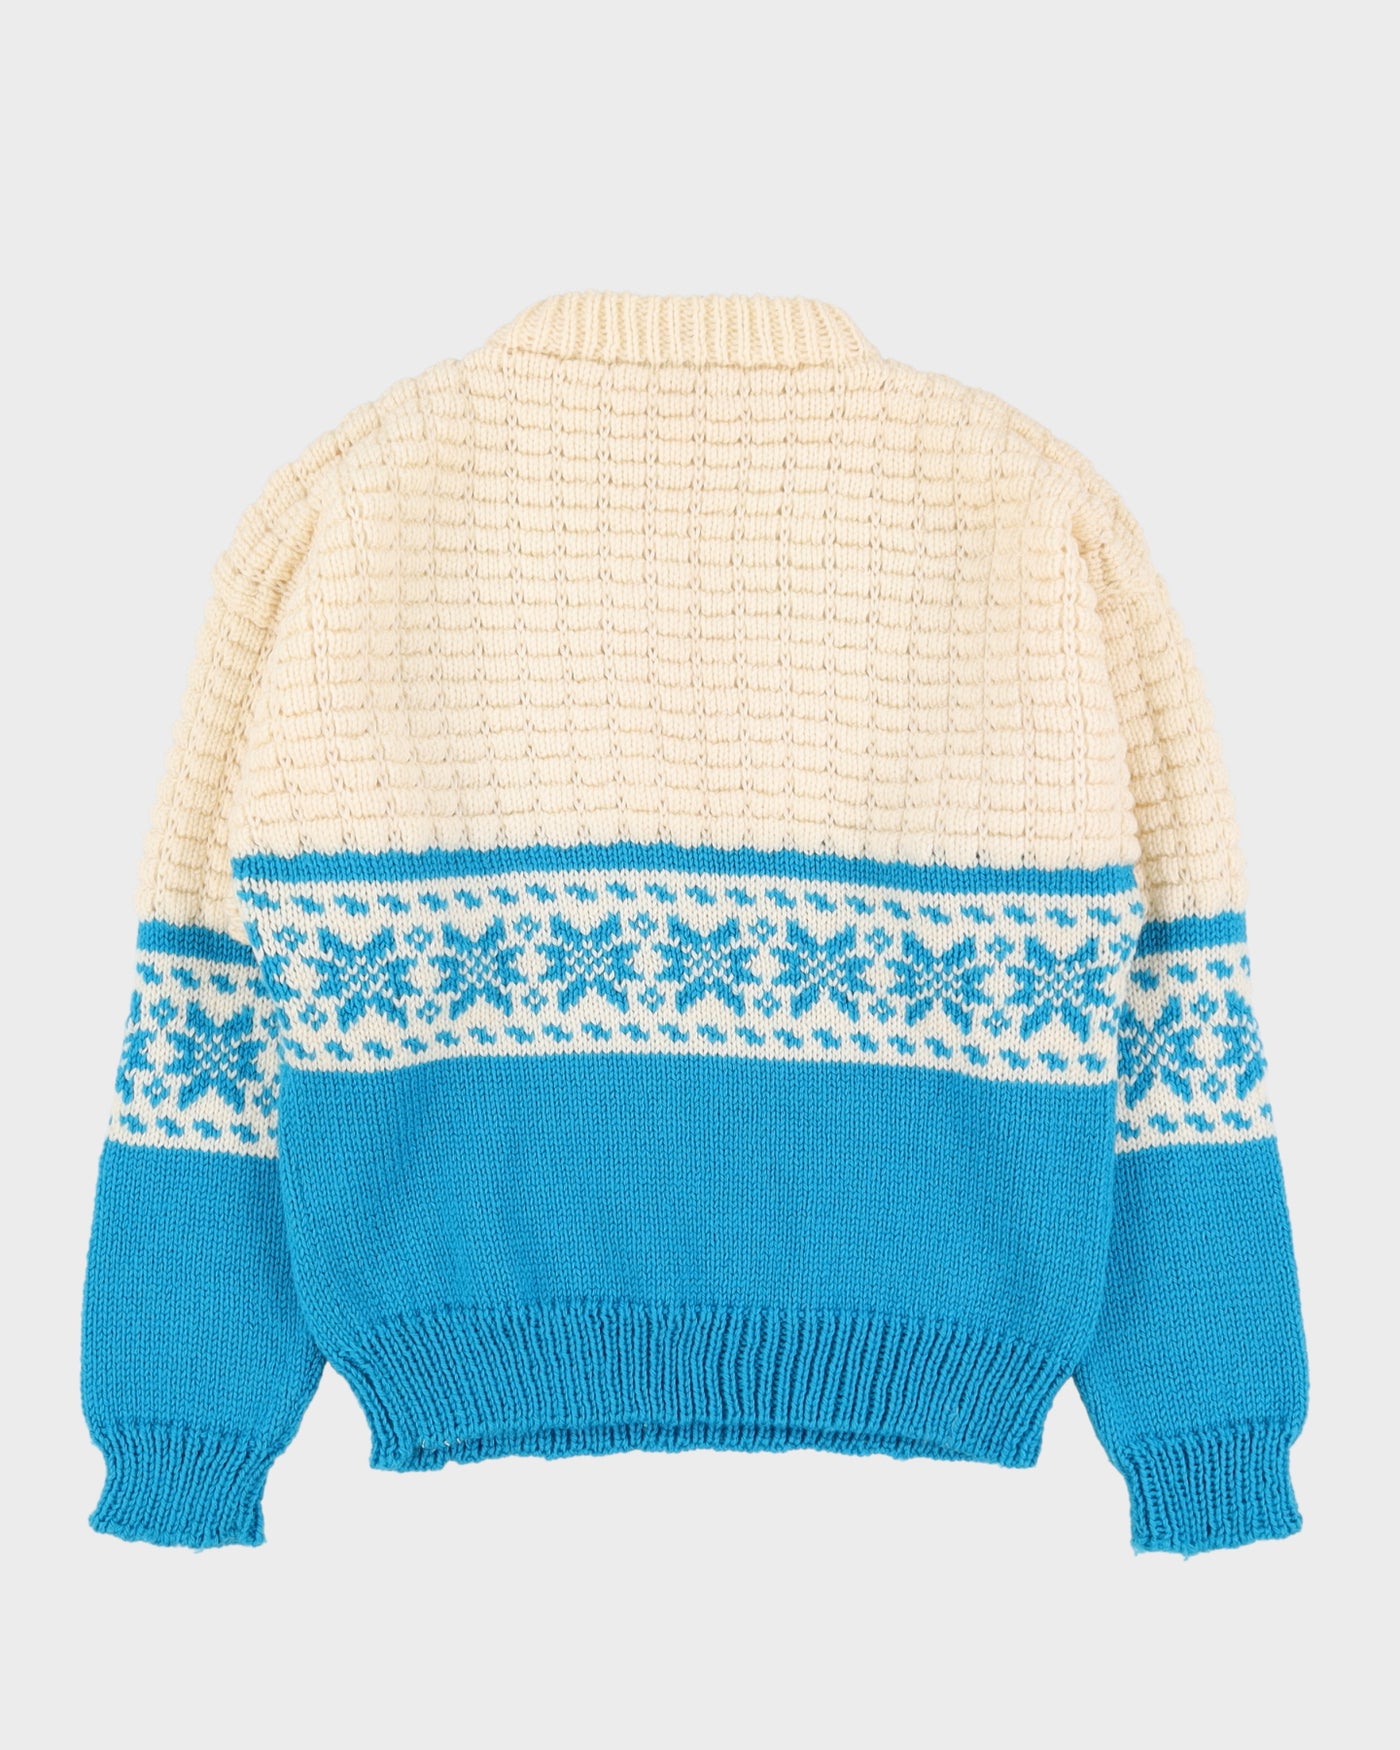 1980s Hand-Knitted Patterned Ski-Style Jumper - M